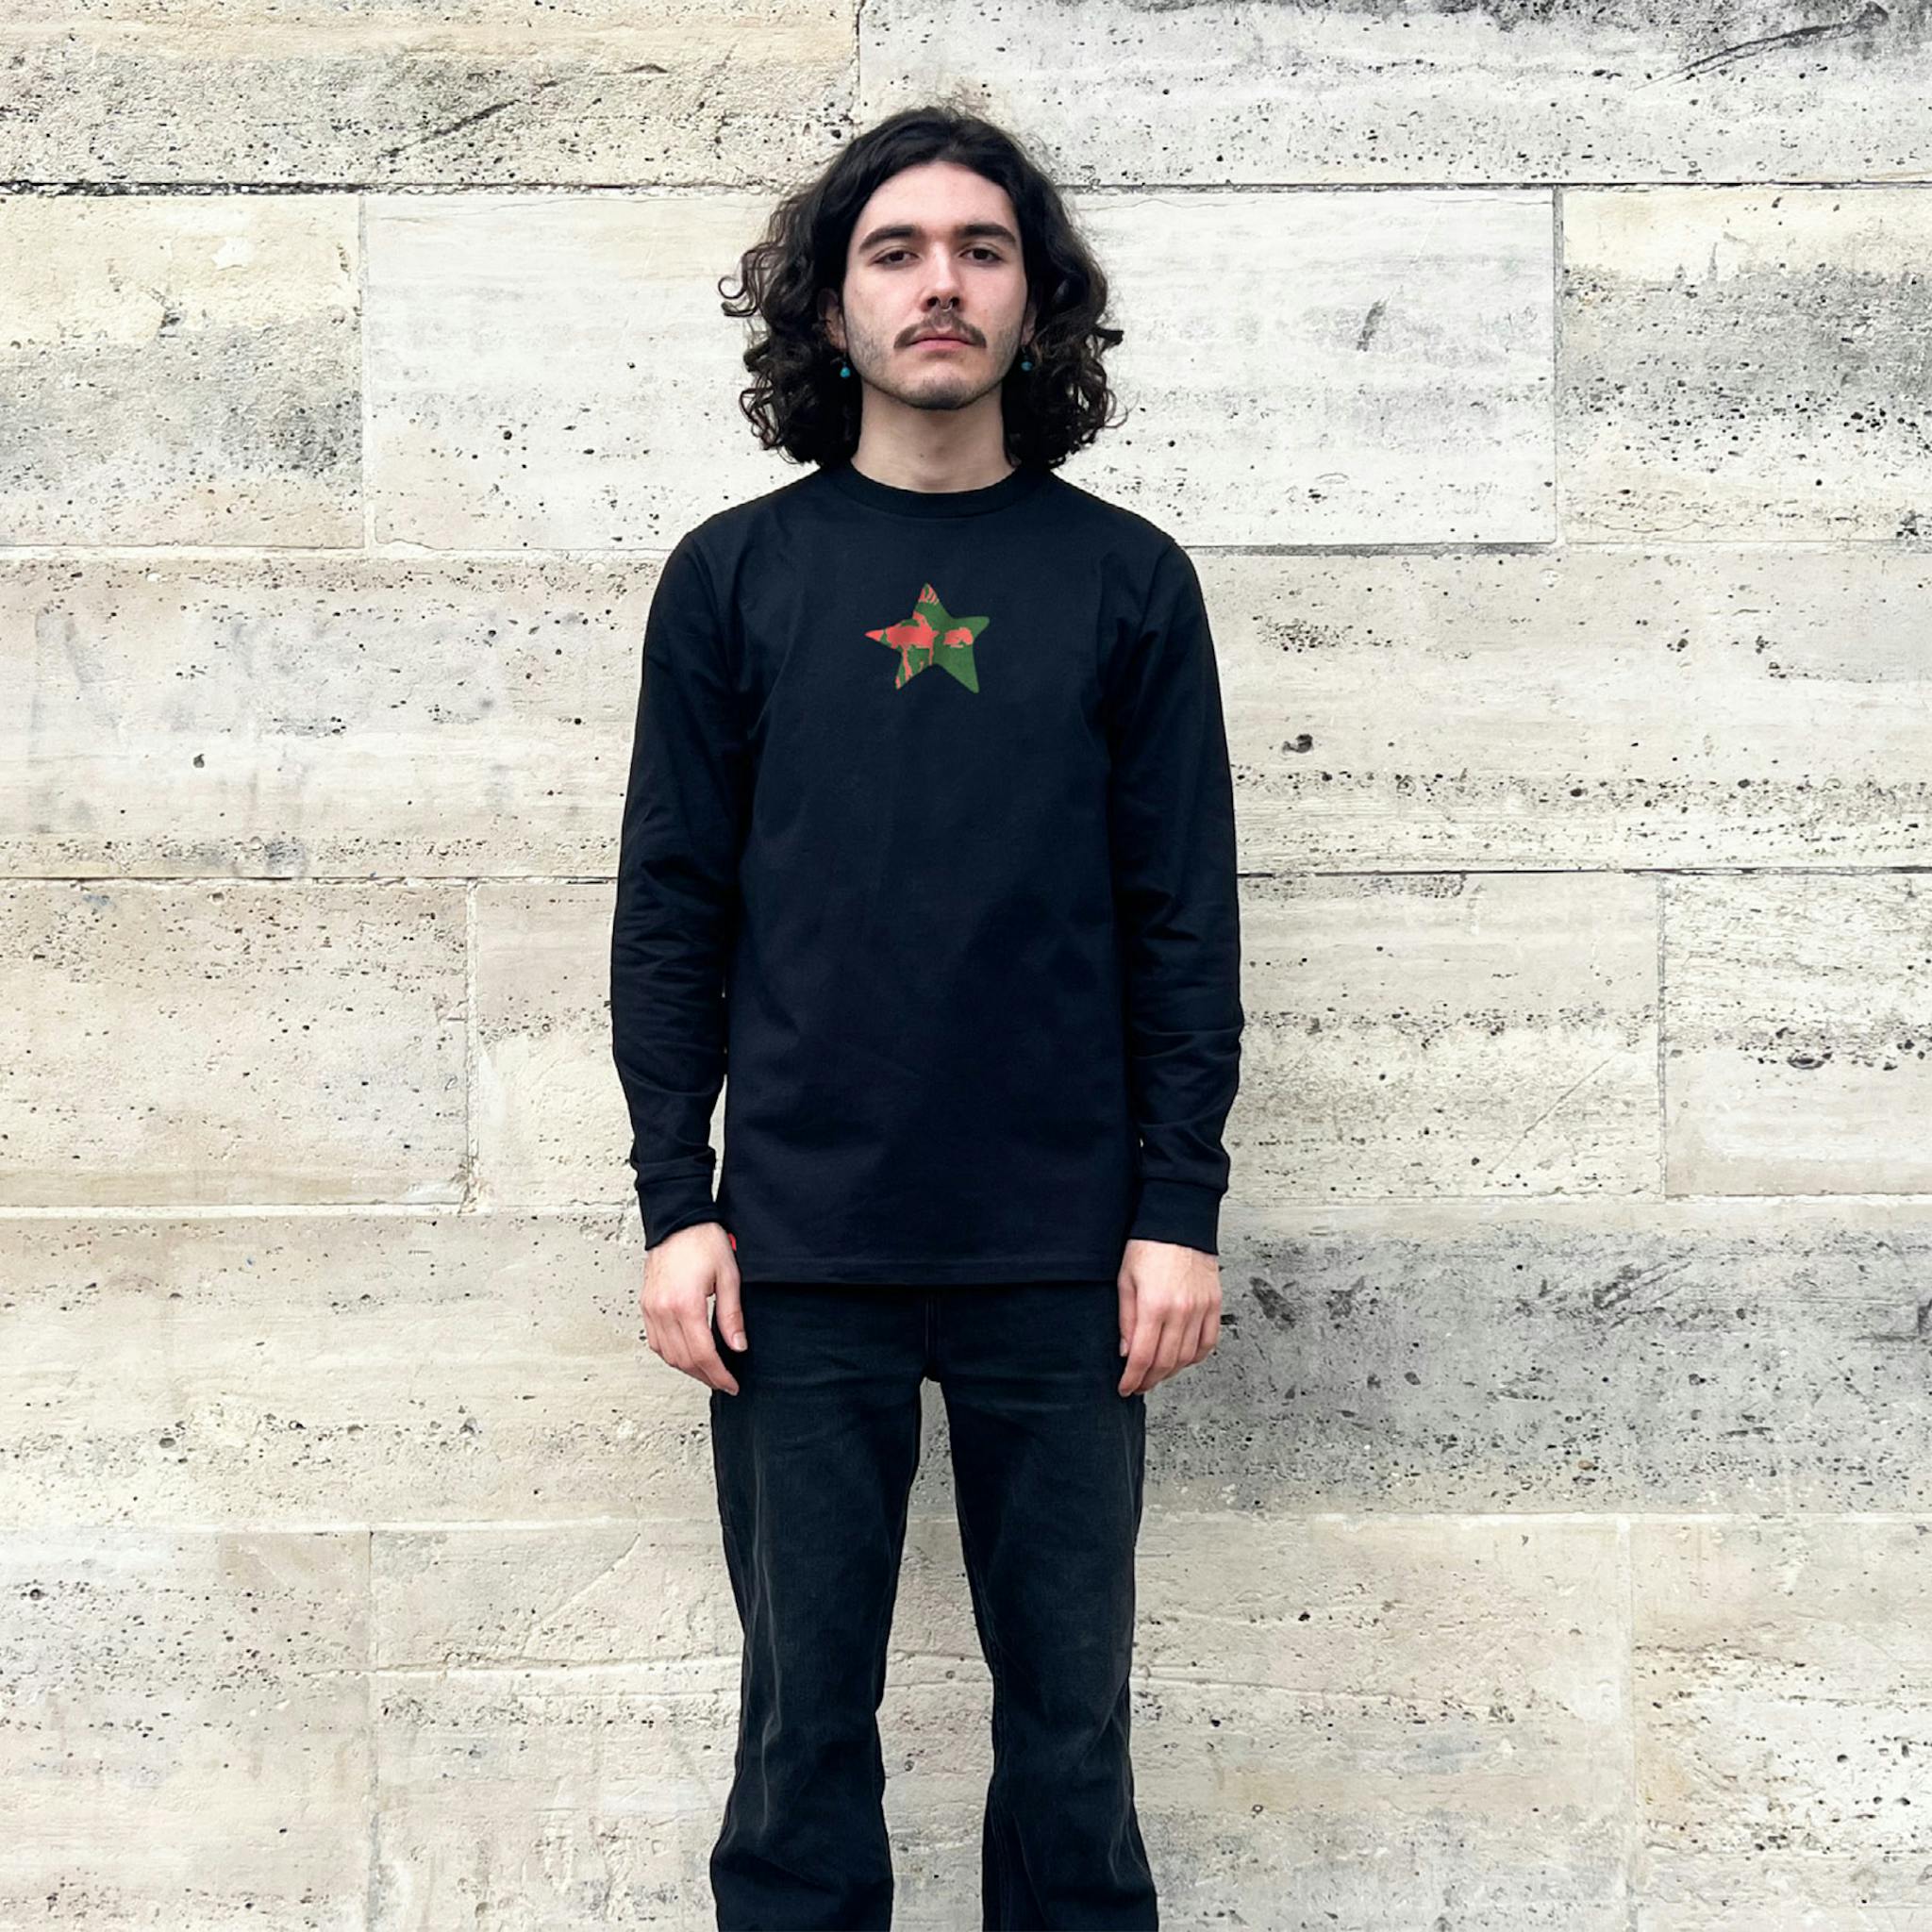 A man with long dark hair wearing a black long-sleeve T-shirt with a small graphic of a red and green star on the chest.